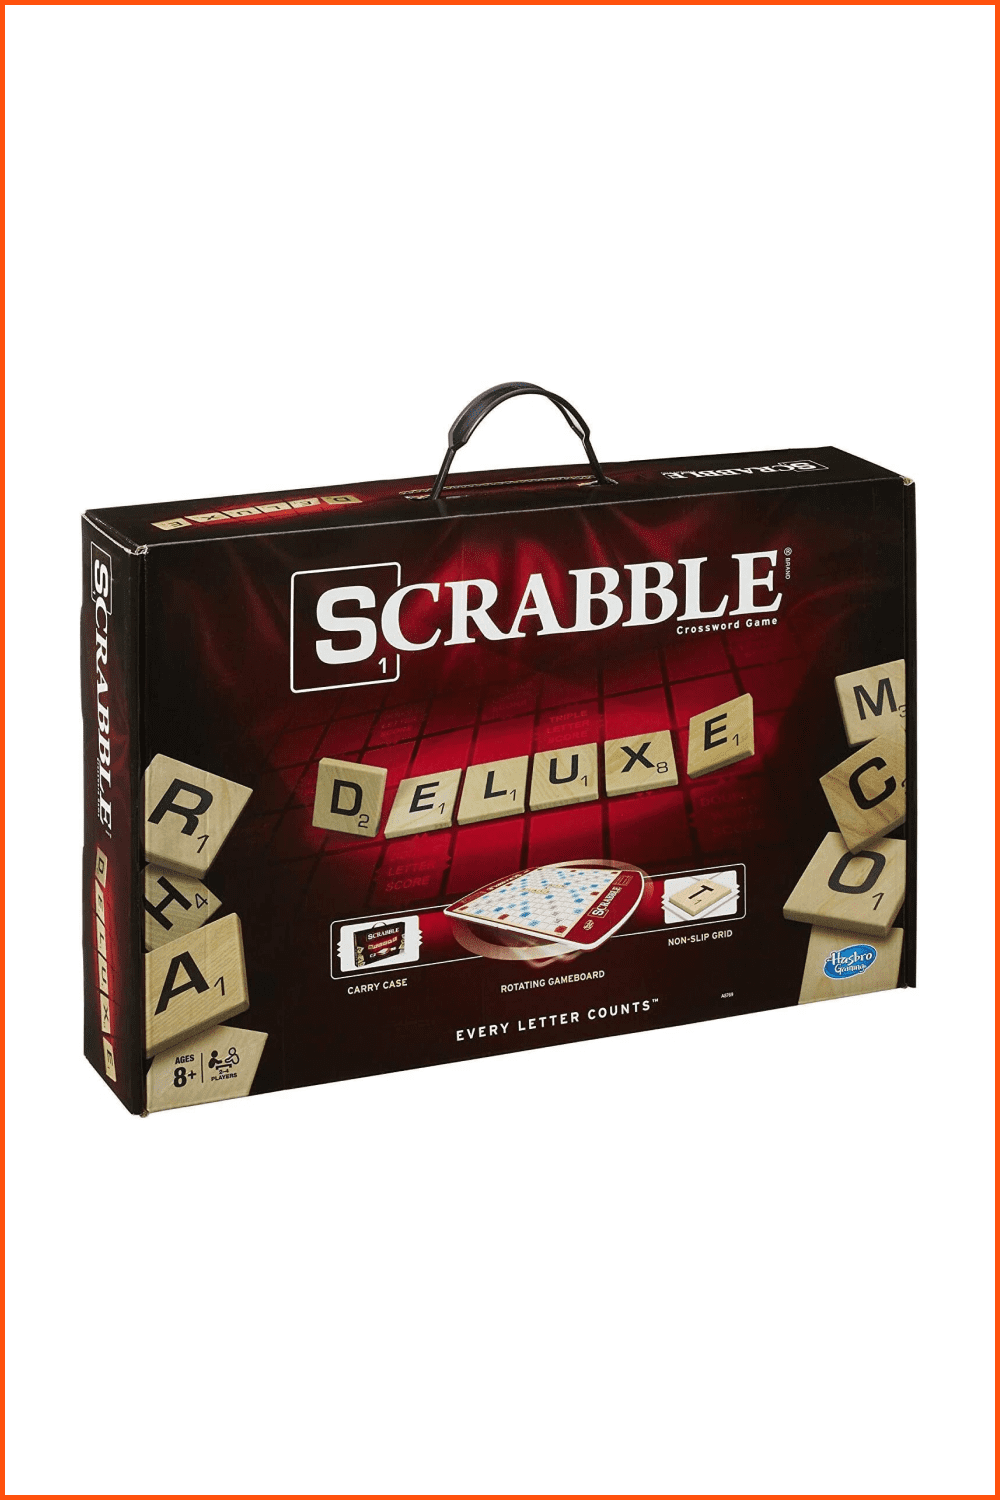 Big burgundy box with Scrabble game.